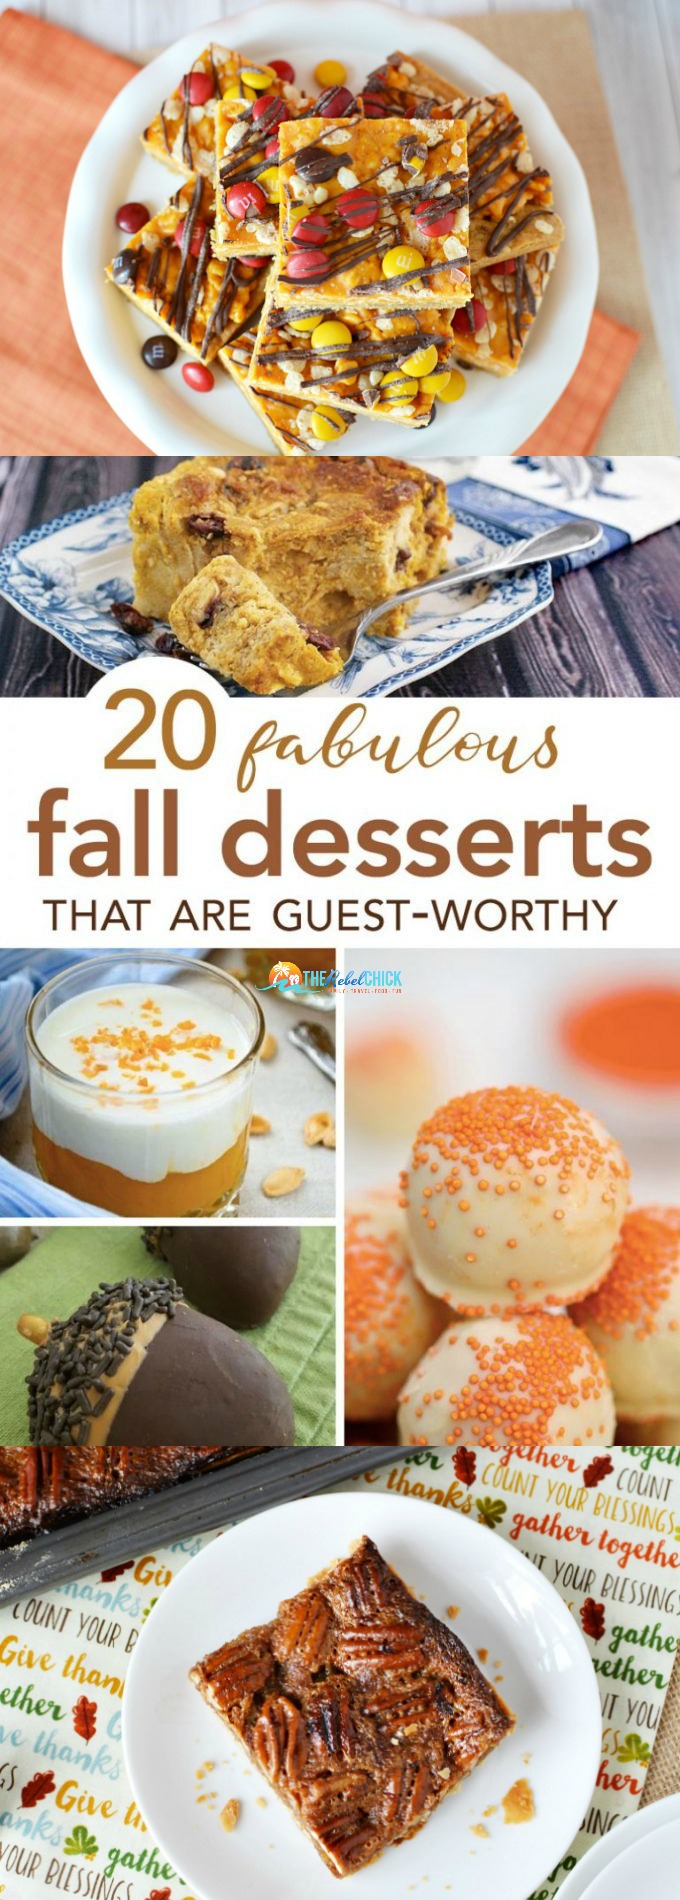 20 Fabulous Fall Desserts that are Guest-Worthy